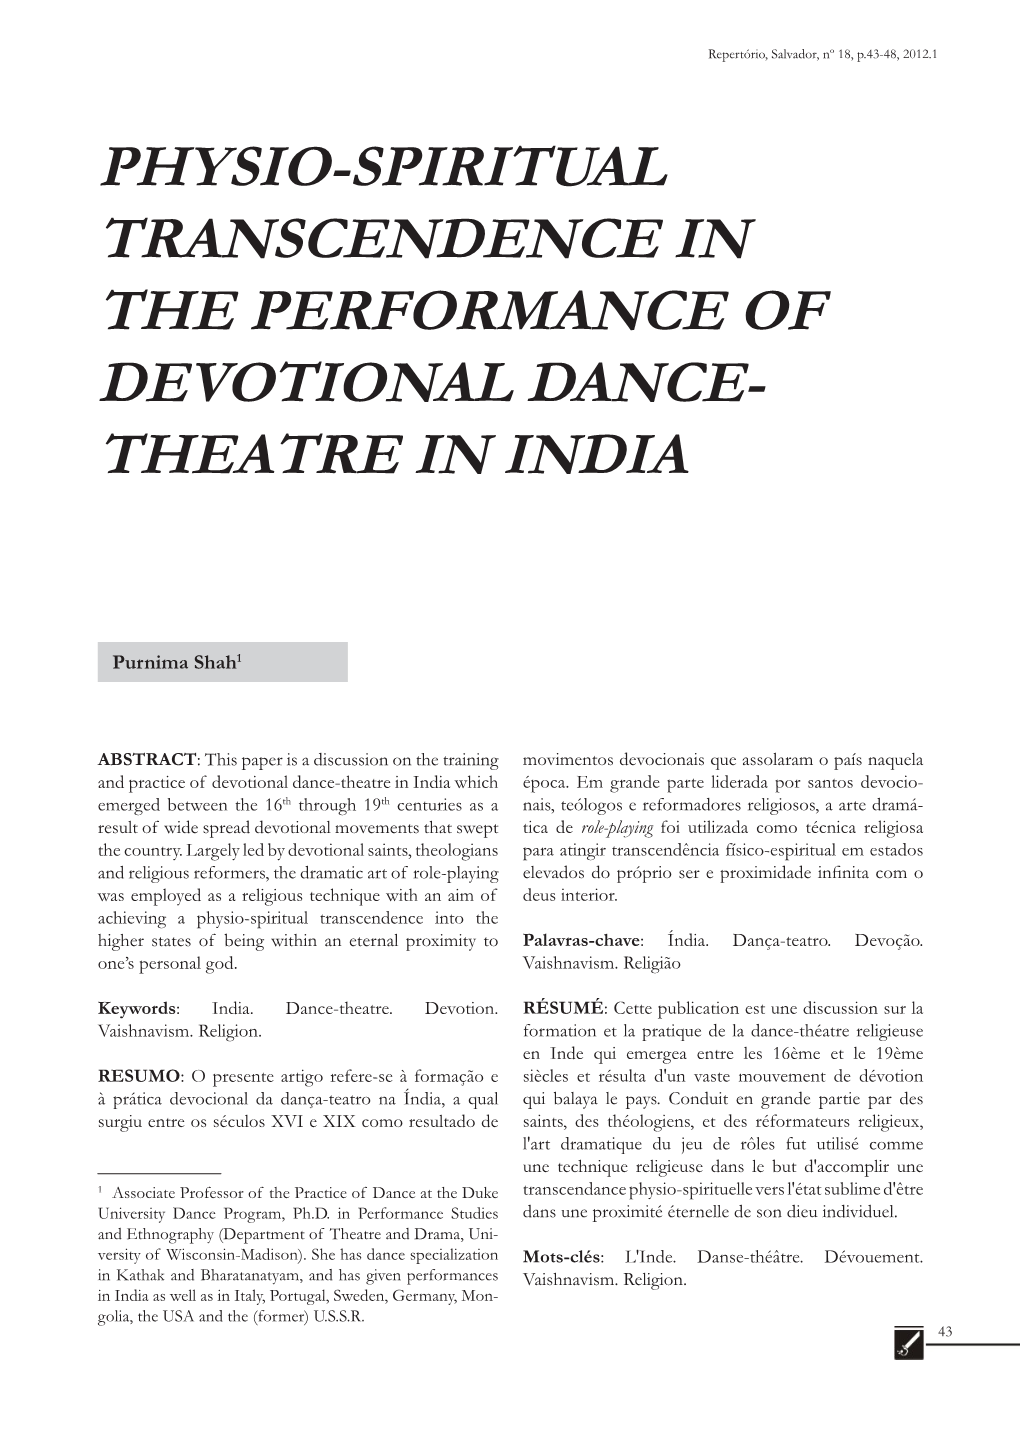 Physio-Spiritual Transcendence in the Performance of Devotional Dance- Theatre in India